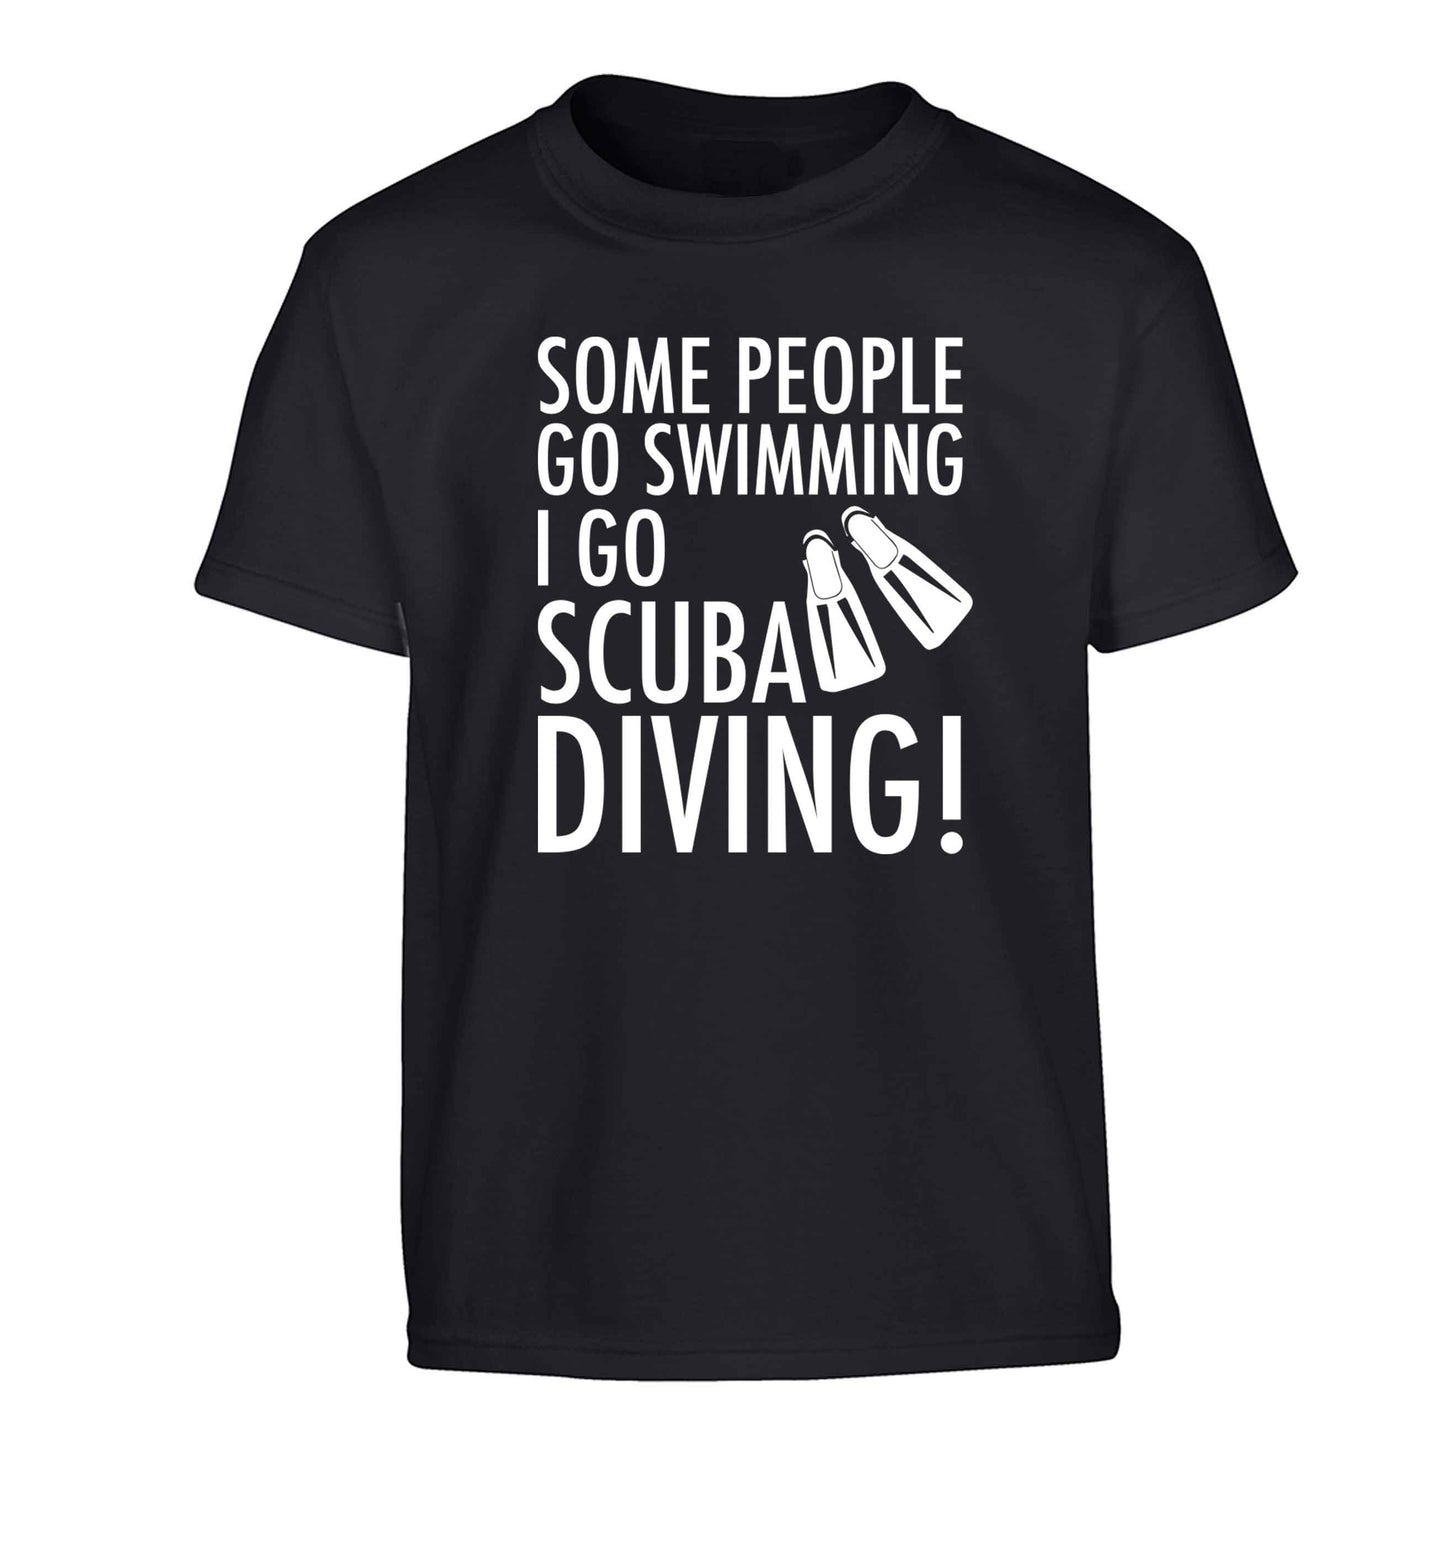 Some people go swimming I go scuba diving! Children's black Tshirt 12-13 Years